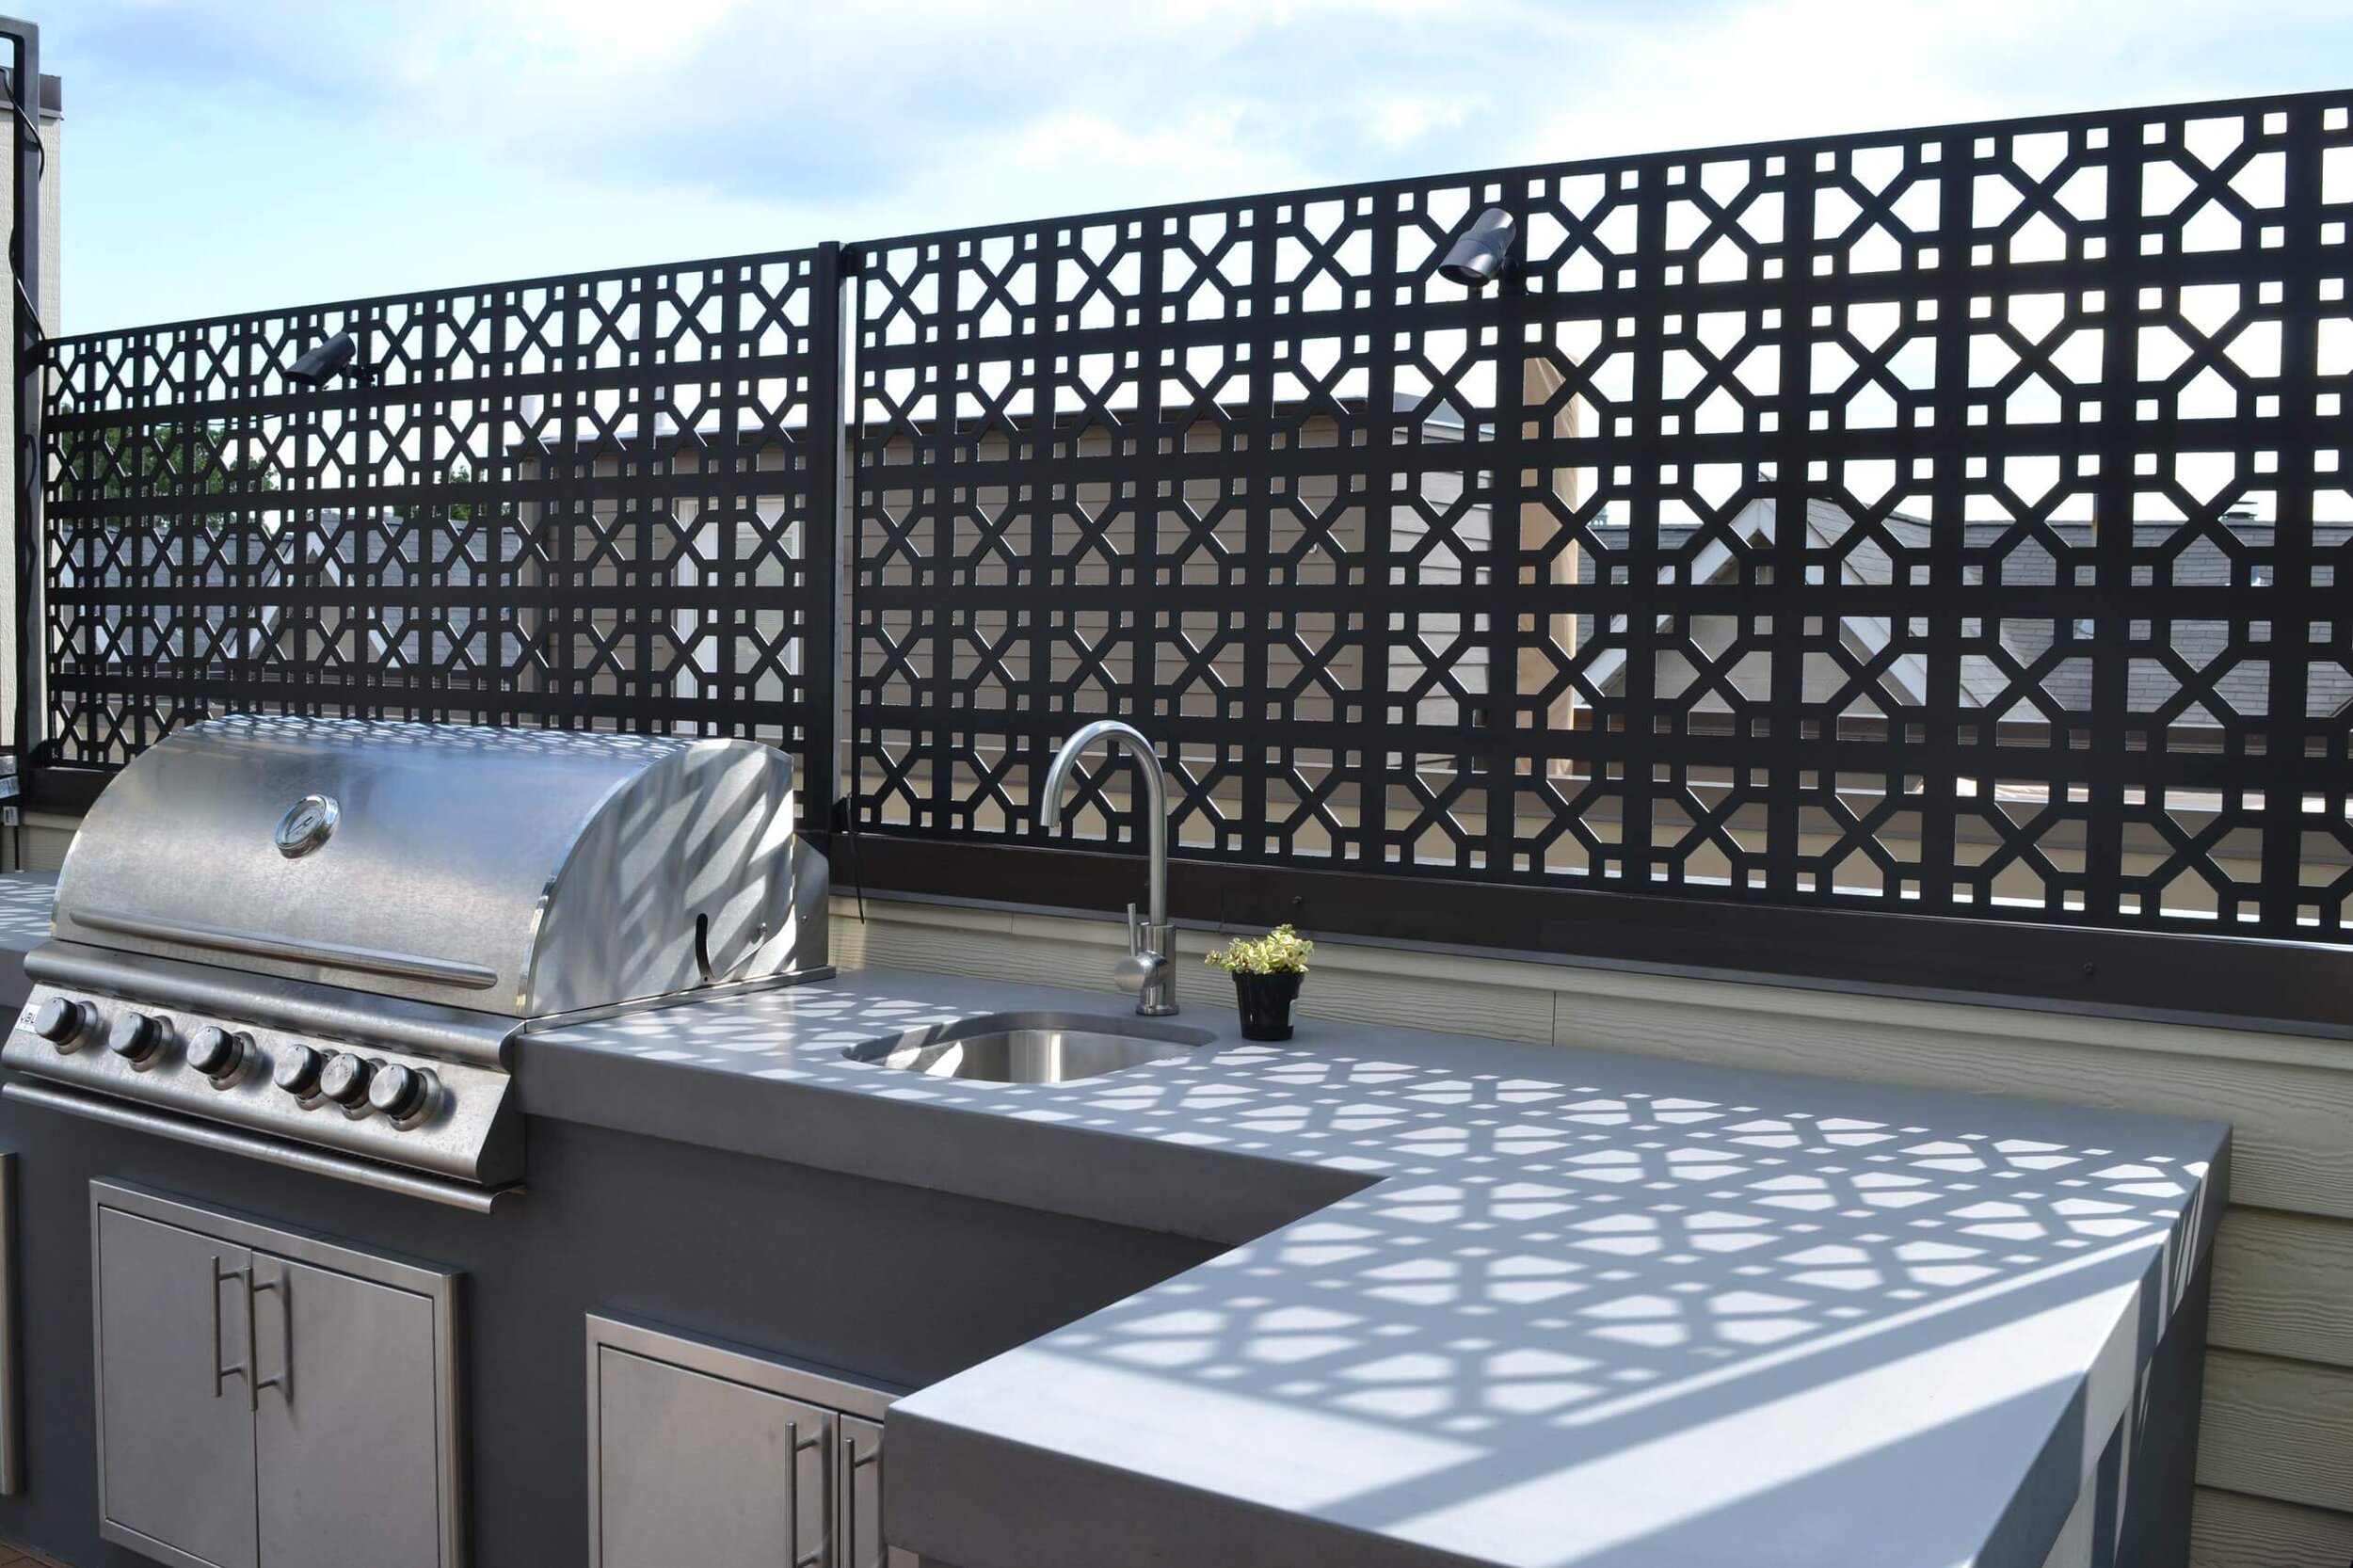 Residential Rooftop Deck in Wicker Park, Chicago